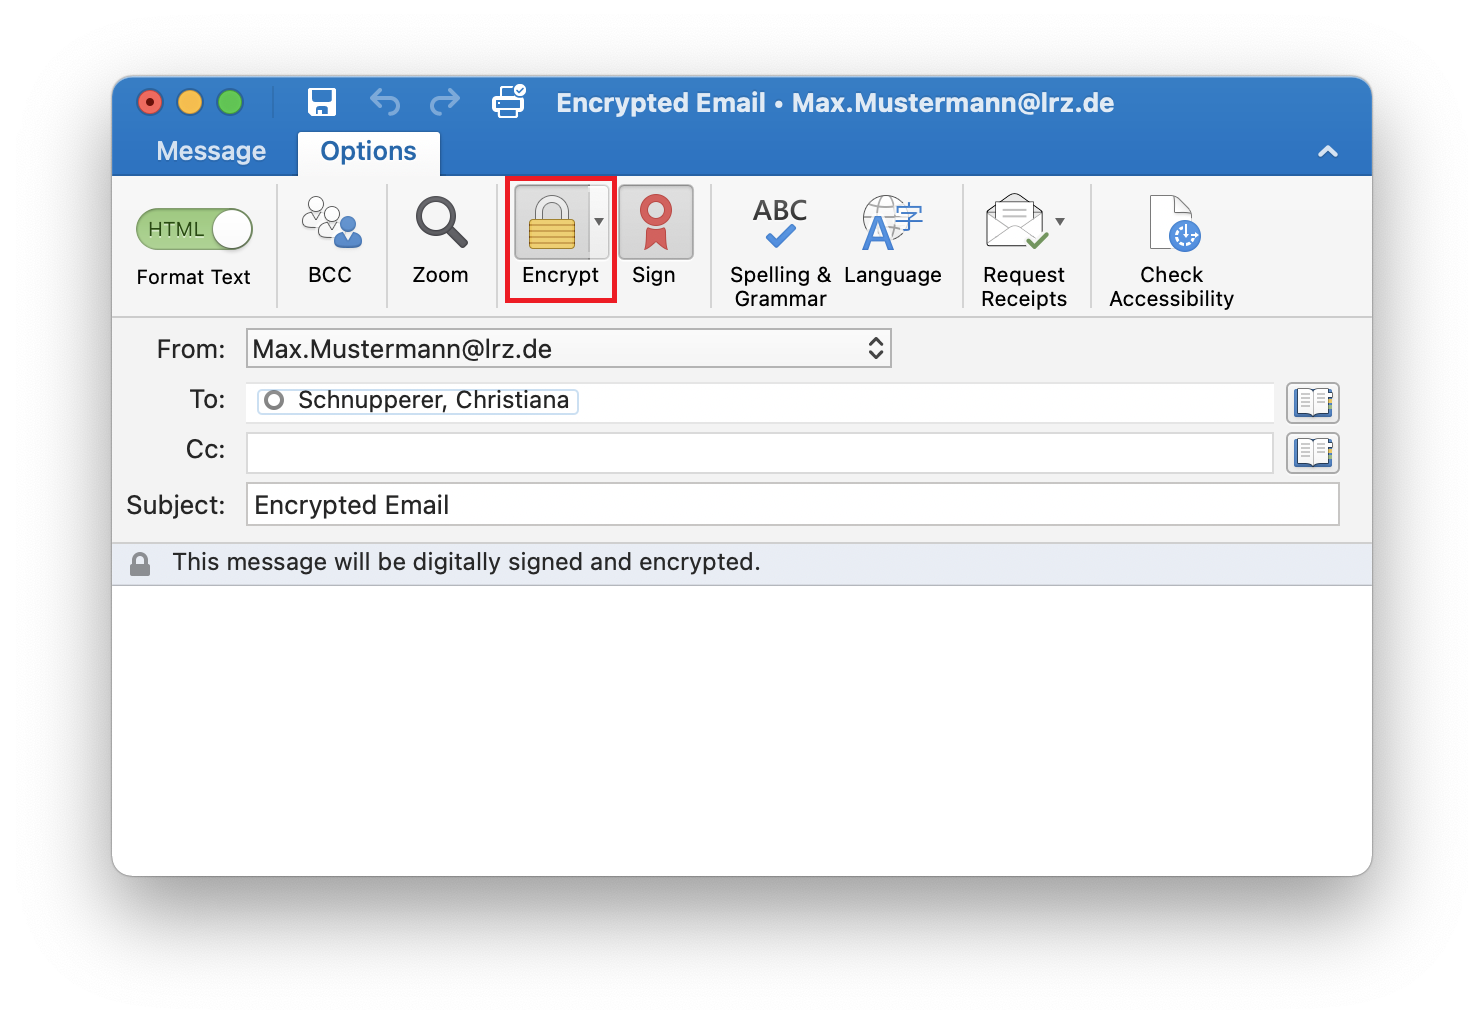 Window as before, only now Encrypt is marked in the command bar.